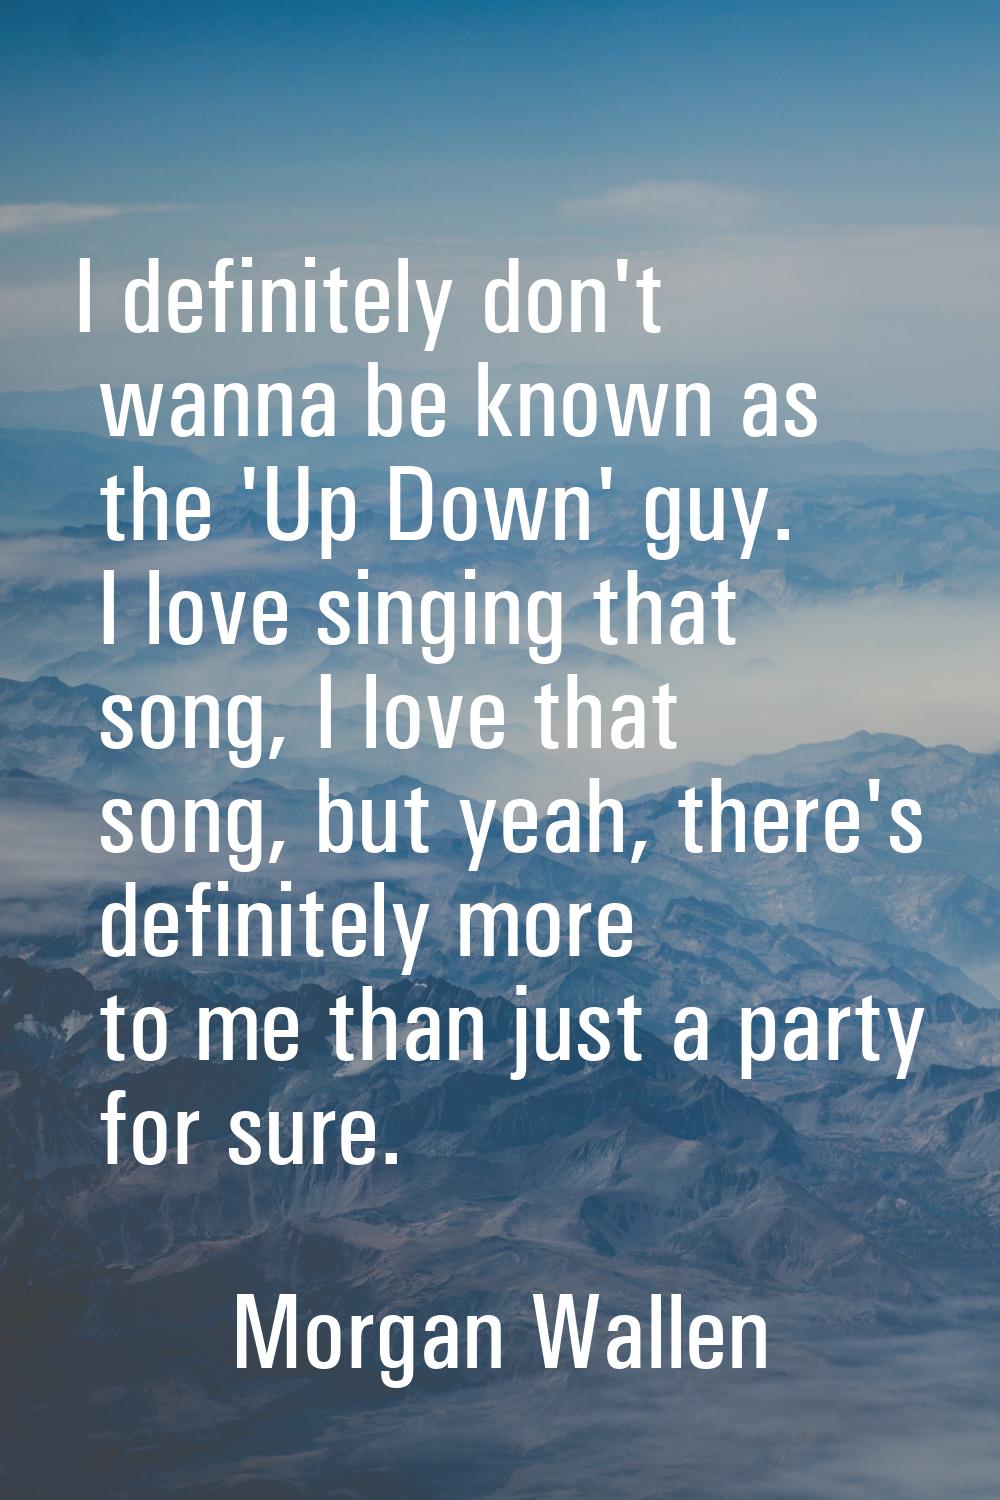 I definitely don't wanna be known as the 'Up Down' guy. I love singing that song, I love that song,